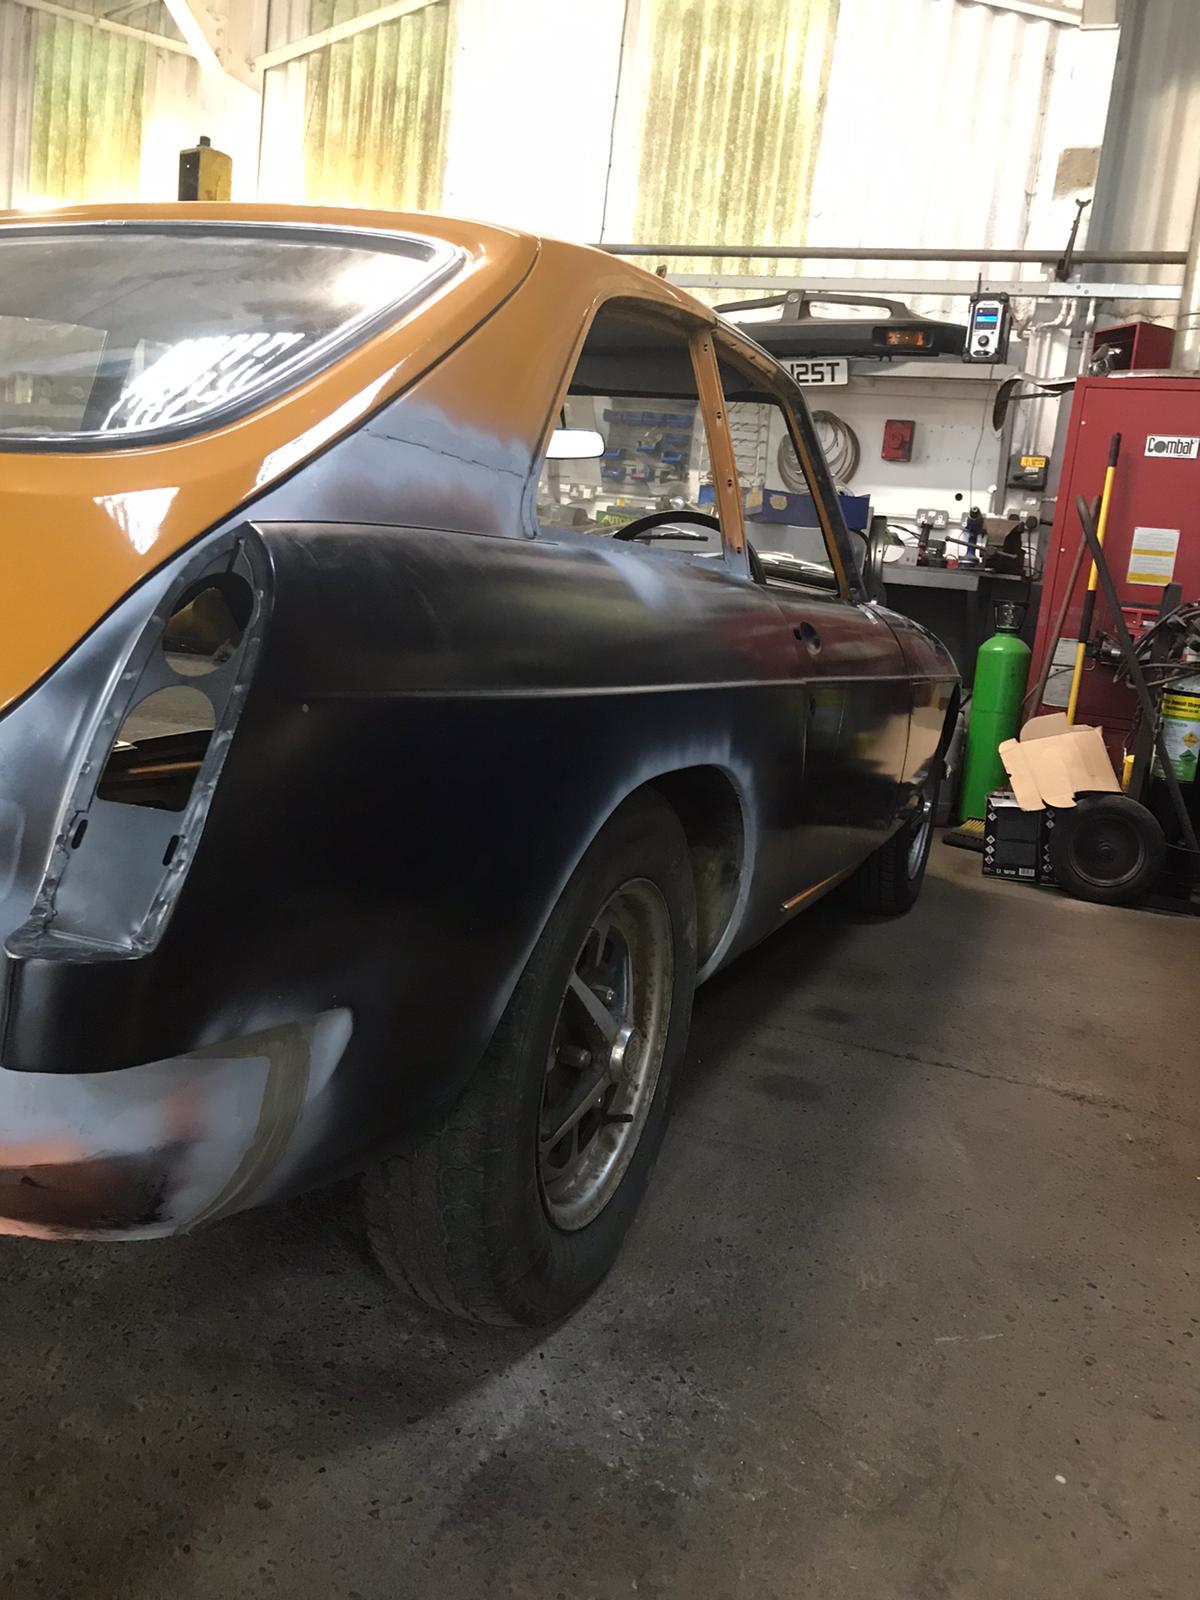 Repairs to a rare automatic MGB GT